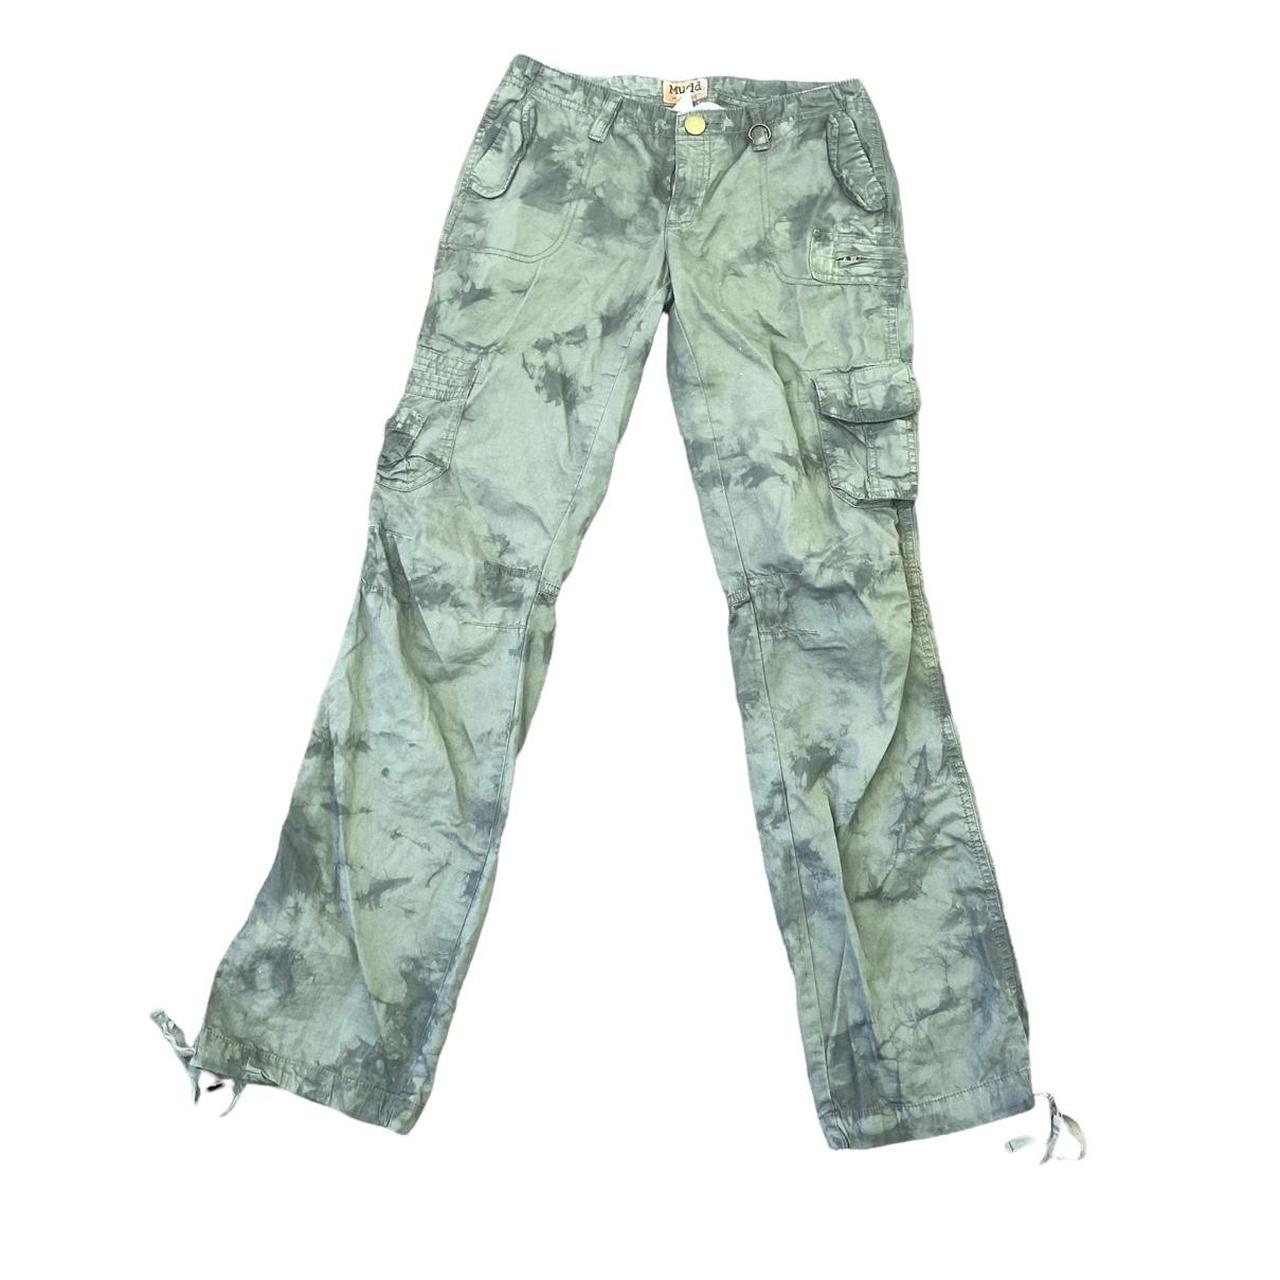 Army green tie dye cargo pants Lots of pockets and... - Depop